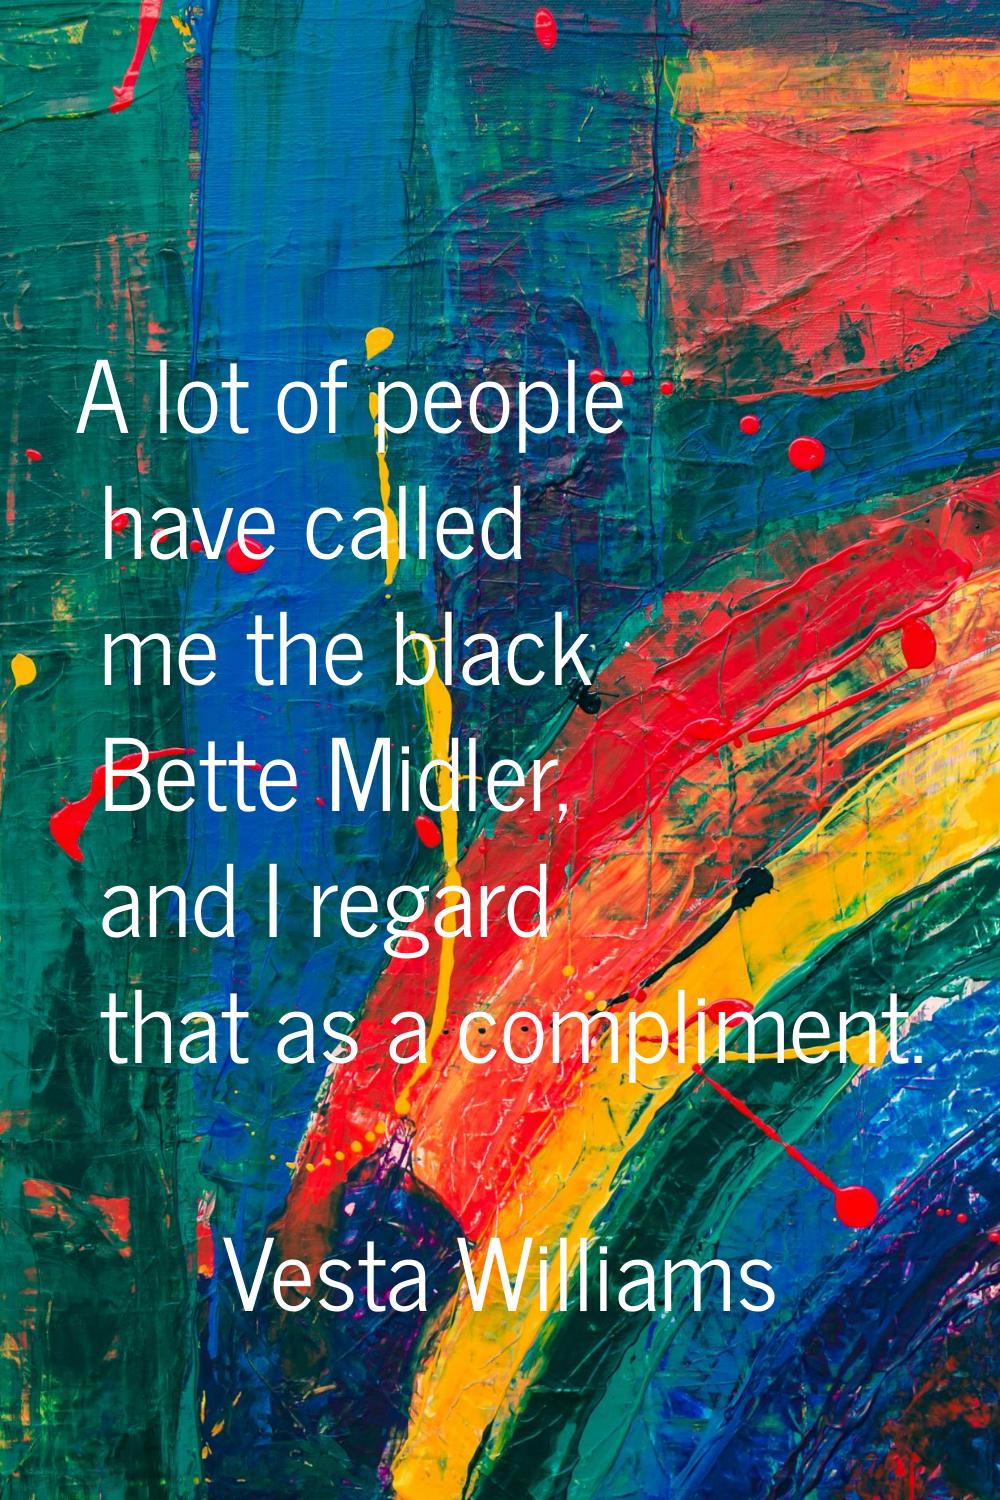 A lot of people have called me the black Bette Midler, and I regard that as a compliment.